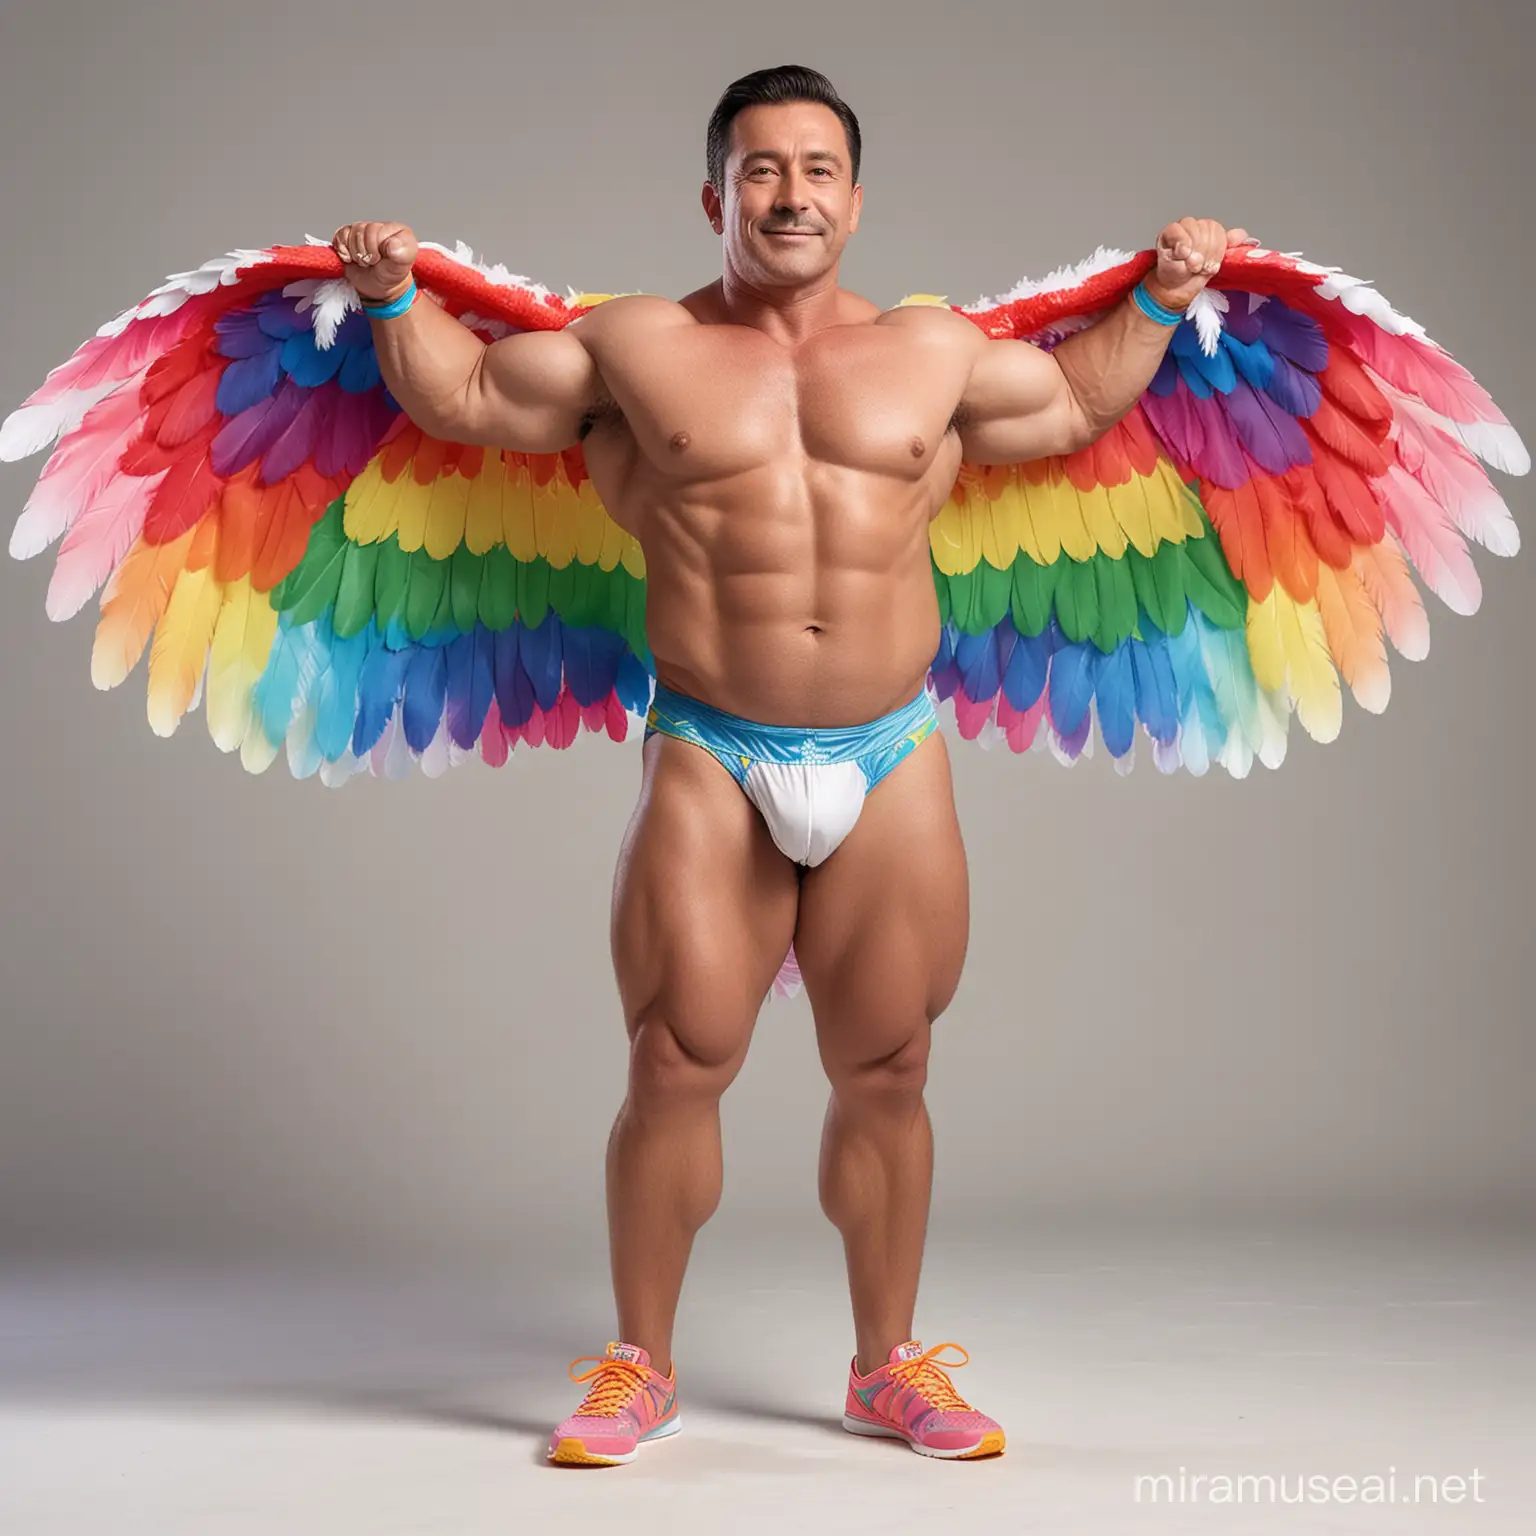 Full Body to feet Topless 30s Ultra Chunky IFBB Bodybuilder Daddy wearing Multi-Highlighter Bright Rainbow Coloured See Through Eagle Wings Shoulder Jacket Short shorts Arms Up Flexing Doraemon